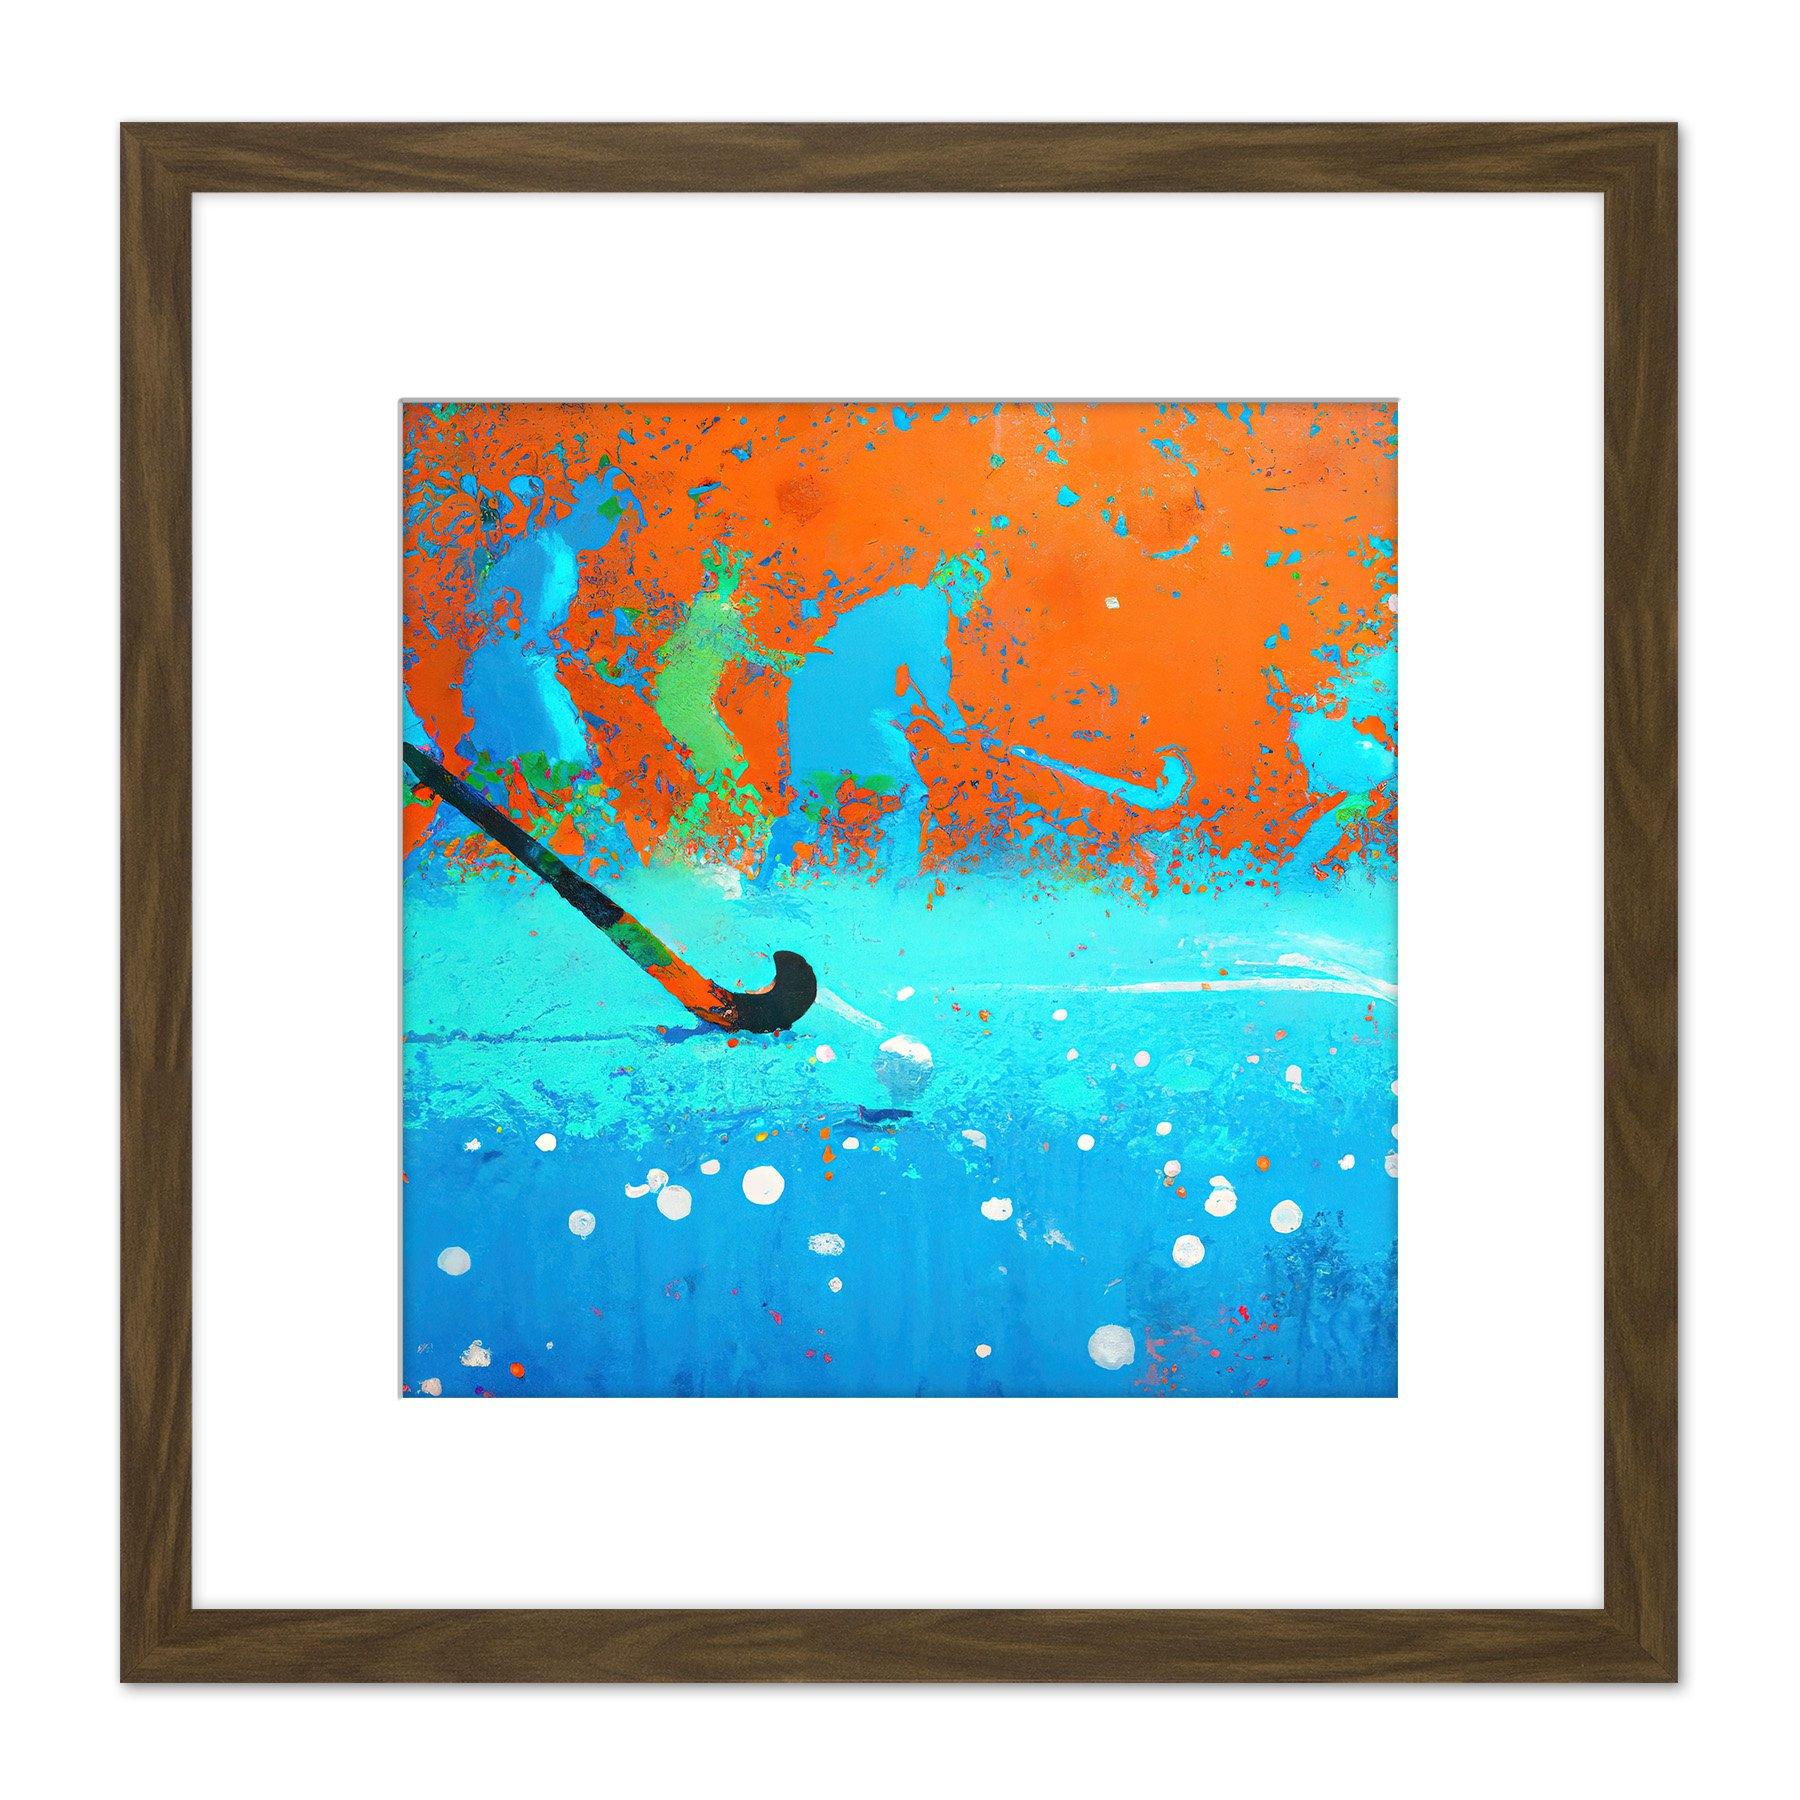 Abstract Field Hockey Stick Players Pitch Blue Orange Sport Oil Painting Square Wooden Framed Wall Art Print Picture 8X8 Inch